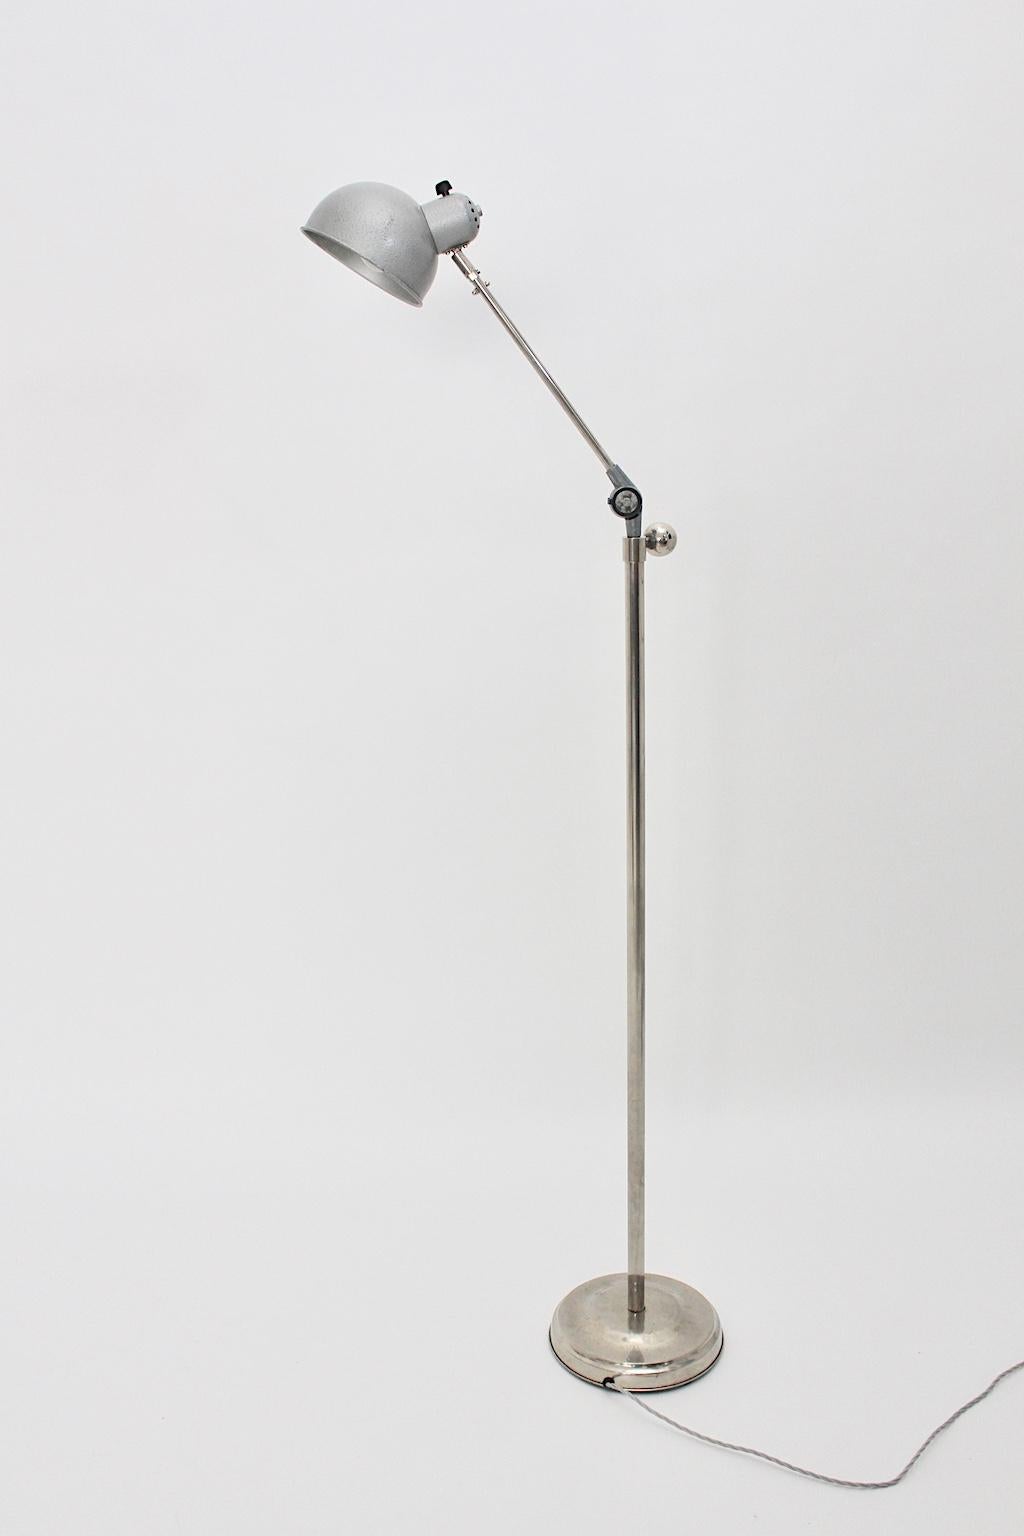 Bauhaus Art Deco nickel metal floor lamp, which is swiveling and adjustable to height from 137 cm to 170 cm.
The floor lamp was made out of nickel plated metal and shows a beautiful patina.
Furthermore the metal lamp shade was grey lacquered.